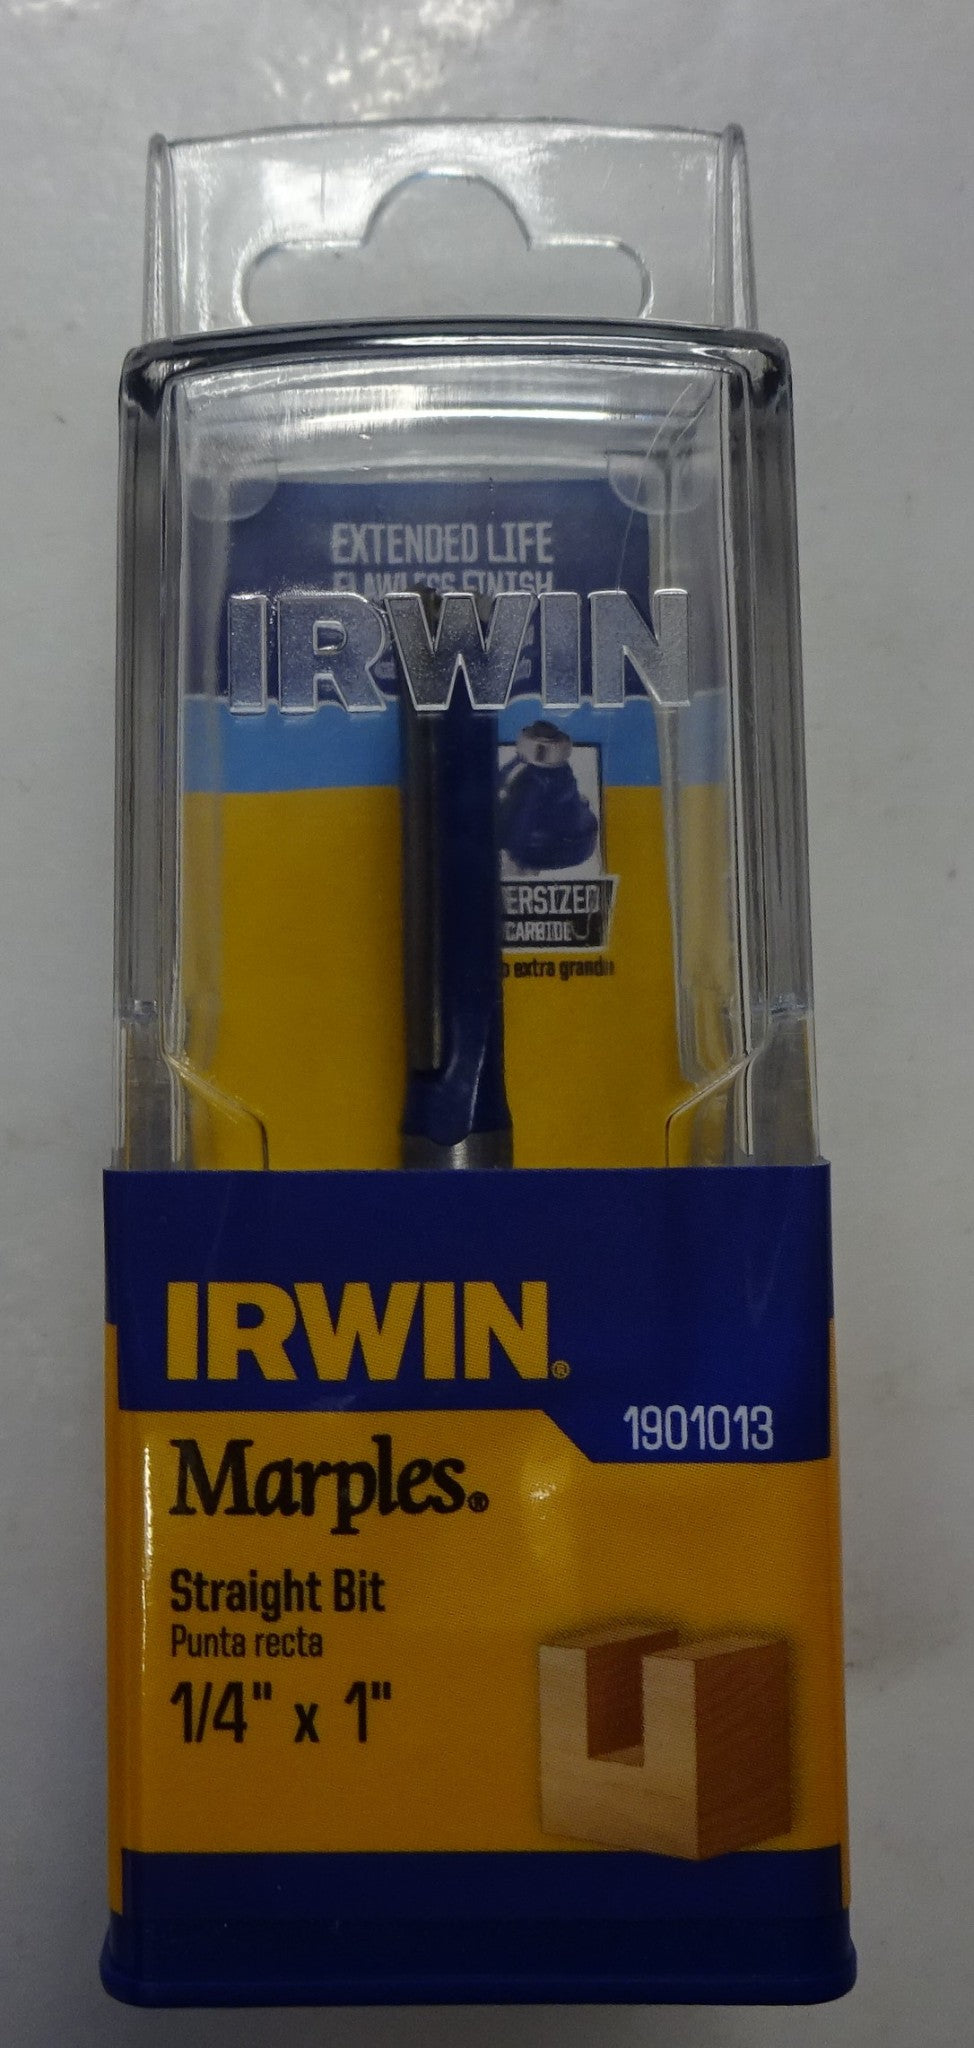 IRWIN Marples 1901013 1/4 x 1" Carbide Tipped Straight Router Bit 1/4" Shank